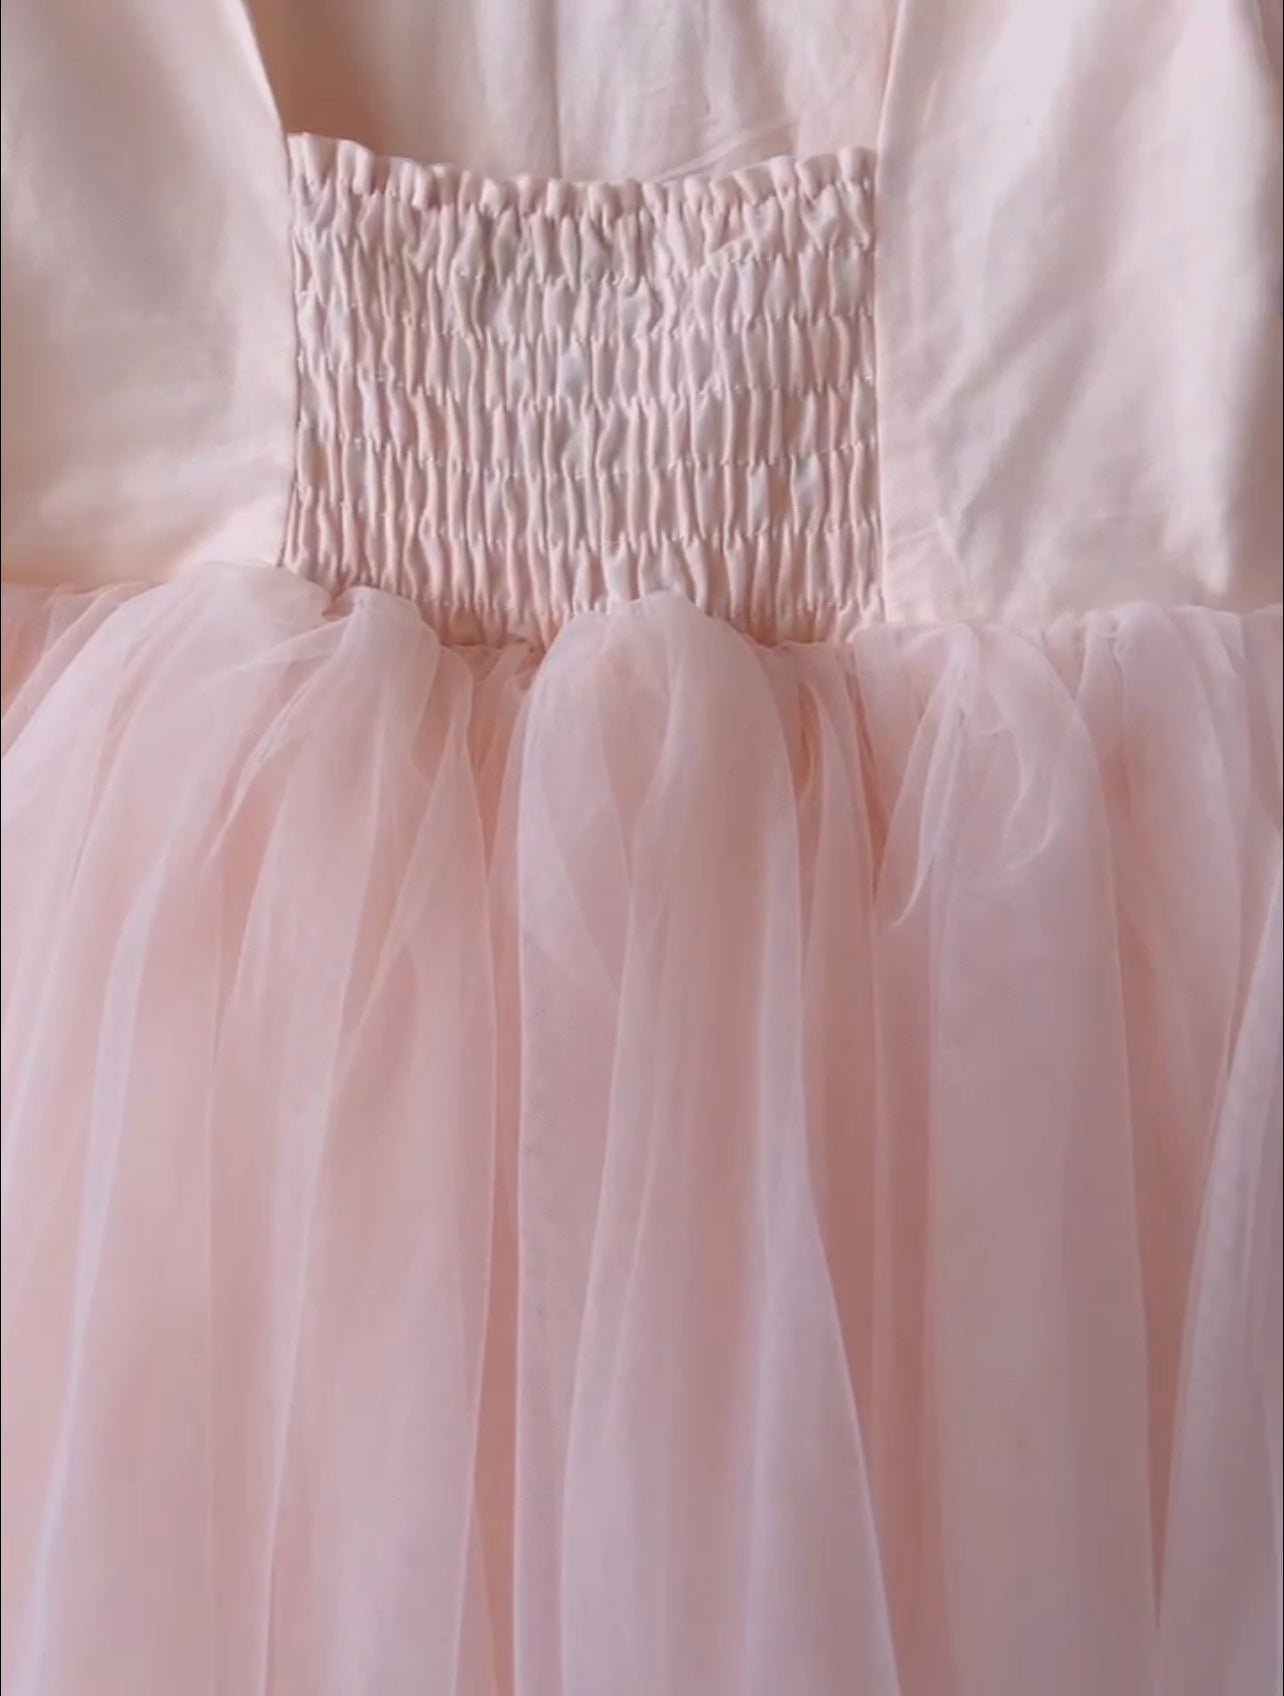 DOLLY by Le Petit Tom ® TULLE BABYDOLL DRESS dollypink